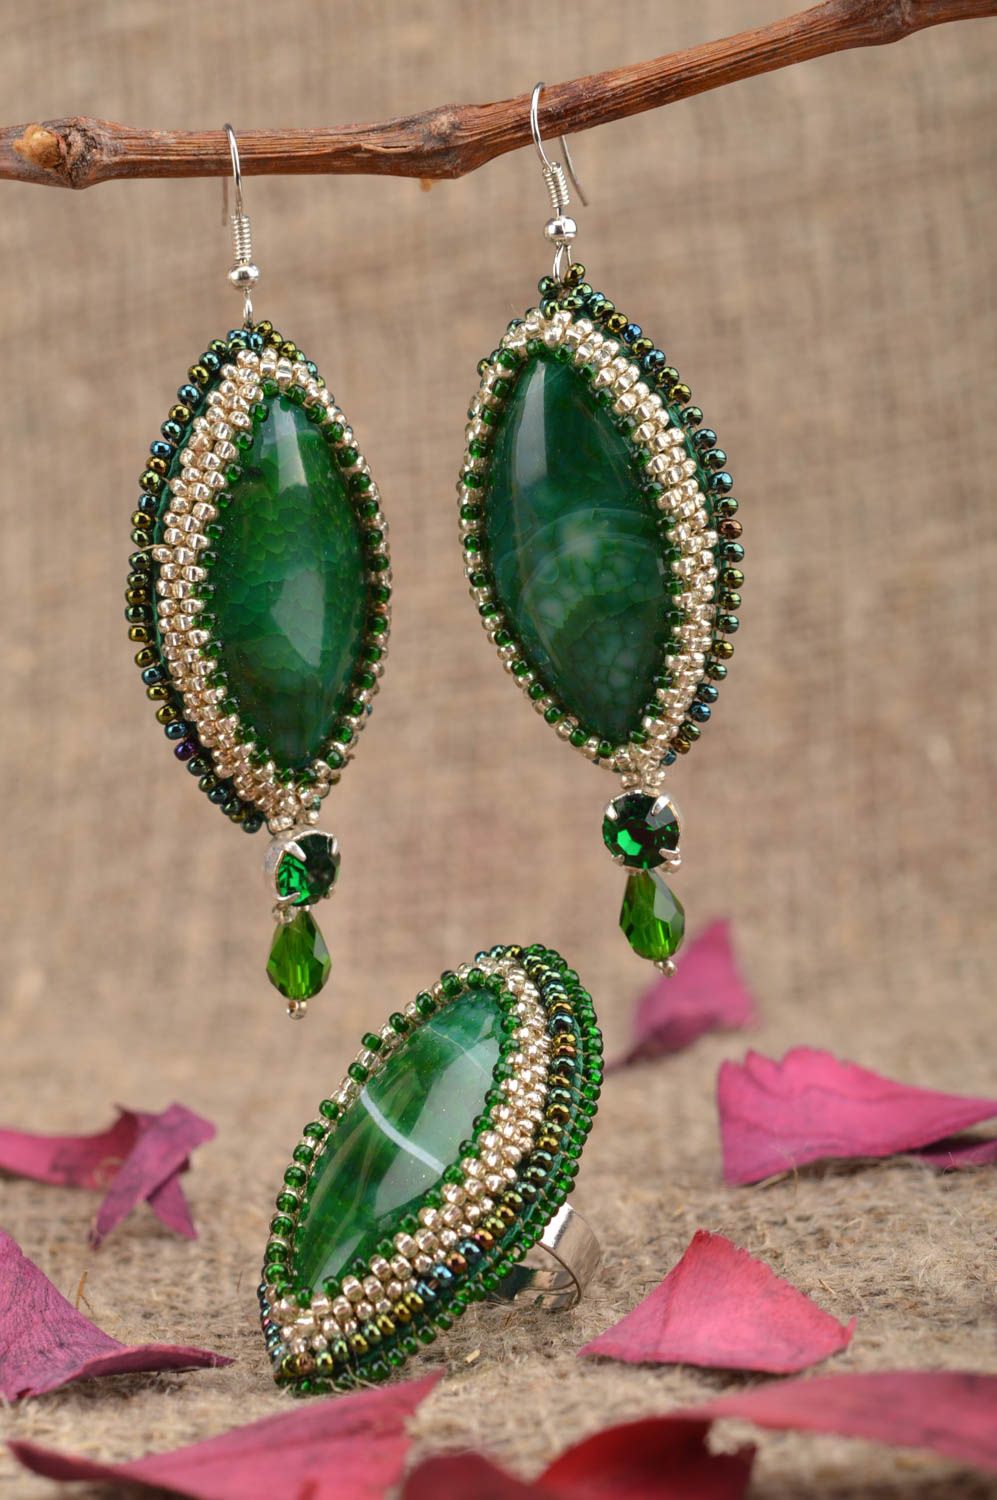 Handmade set of jewelry made of beads and natural stone earrings and ring photo 1